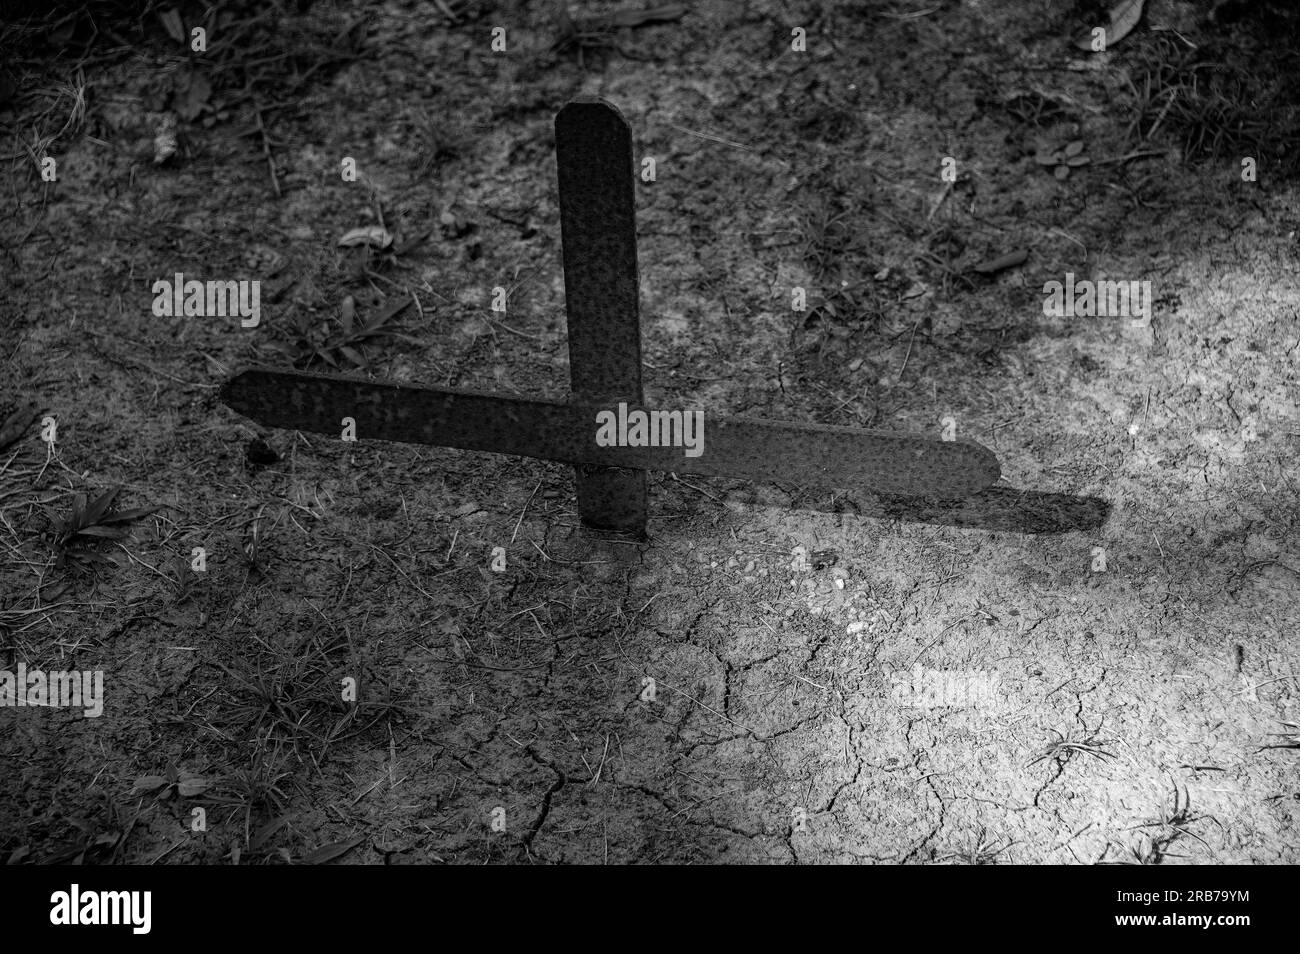 In the cemetary in Houma, this steel cross marking a grave has been buried over time from repeated floodings and hurricanes. Stock Photo